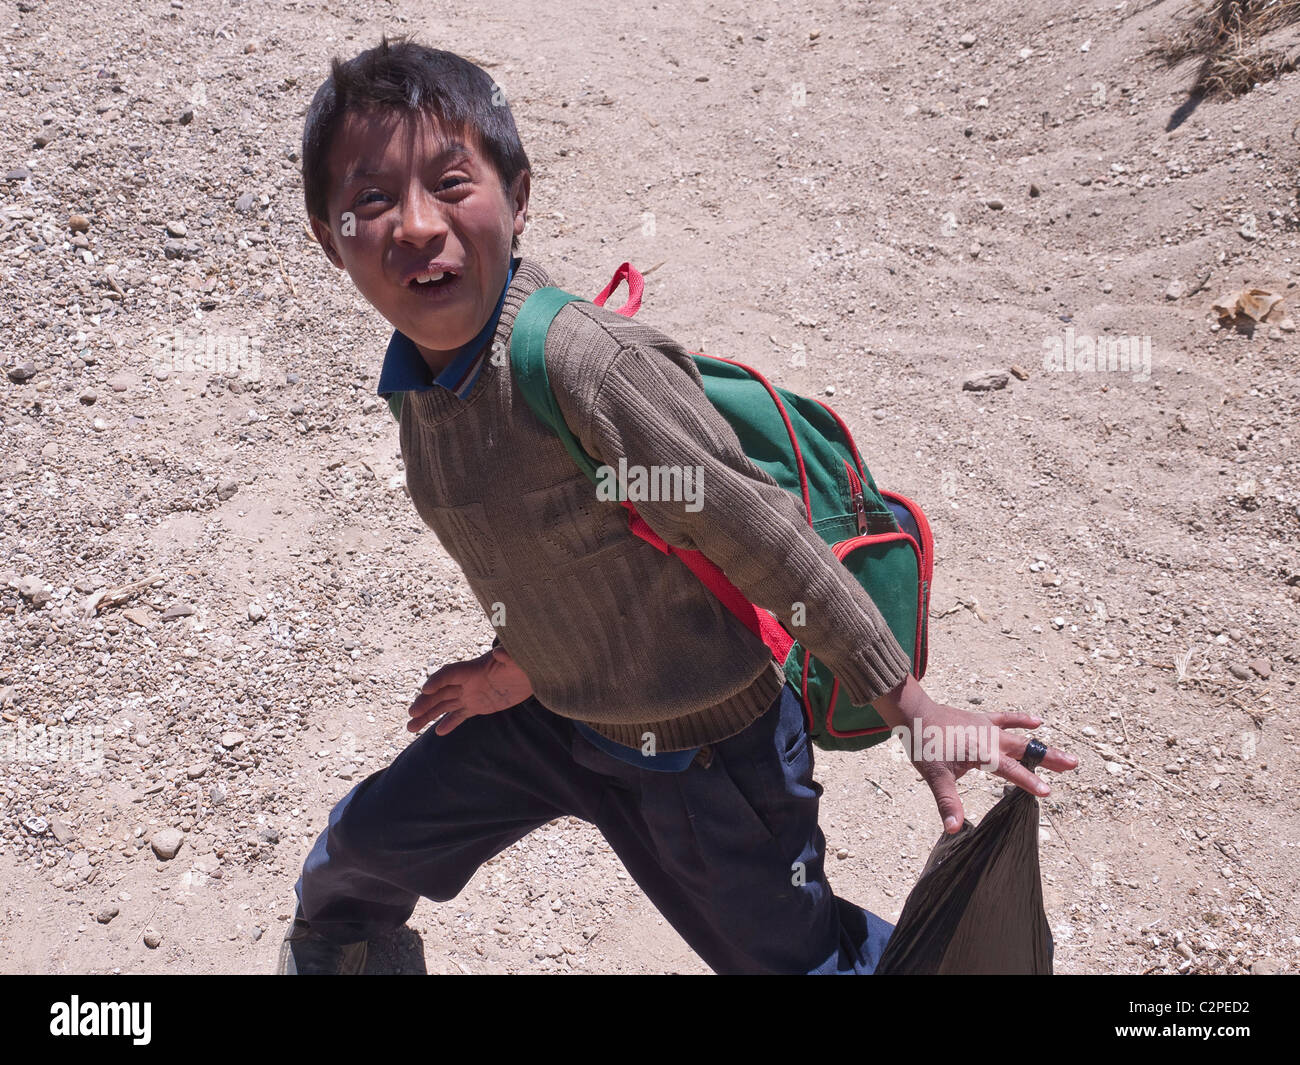 A primary school boy makes a very funny face as he runs across the dirt  road in Totonicapan, Guatemala Stock Photo - Alamy